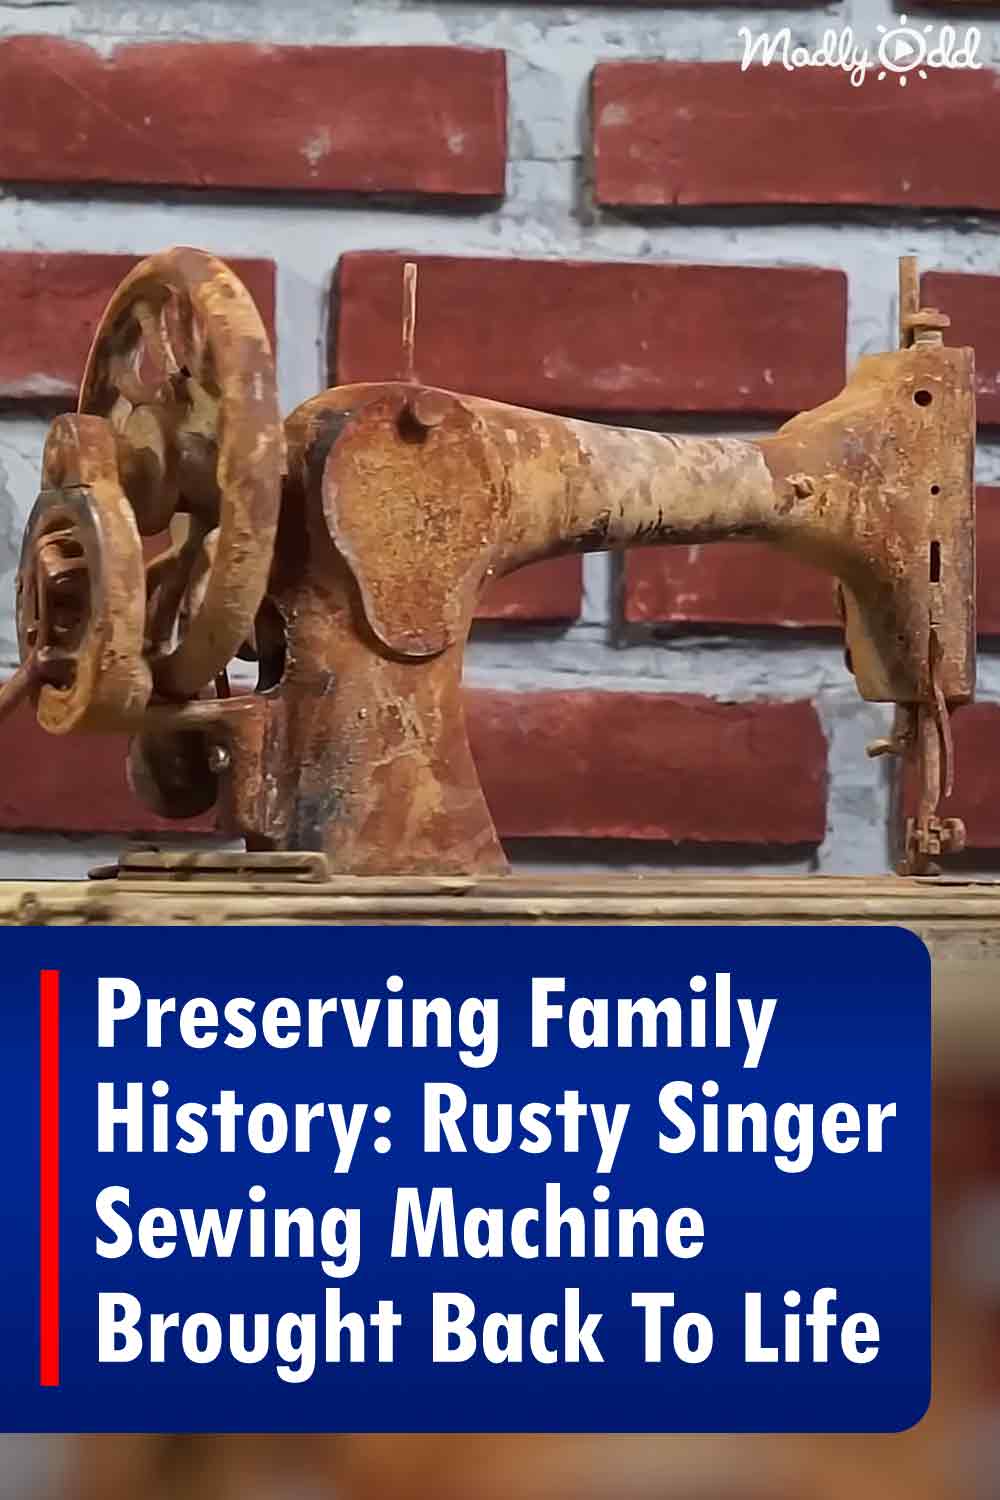 Preserving Family History: Rusty Singer Sewing Machine Brought Back To Life